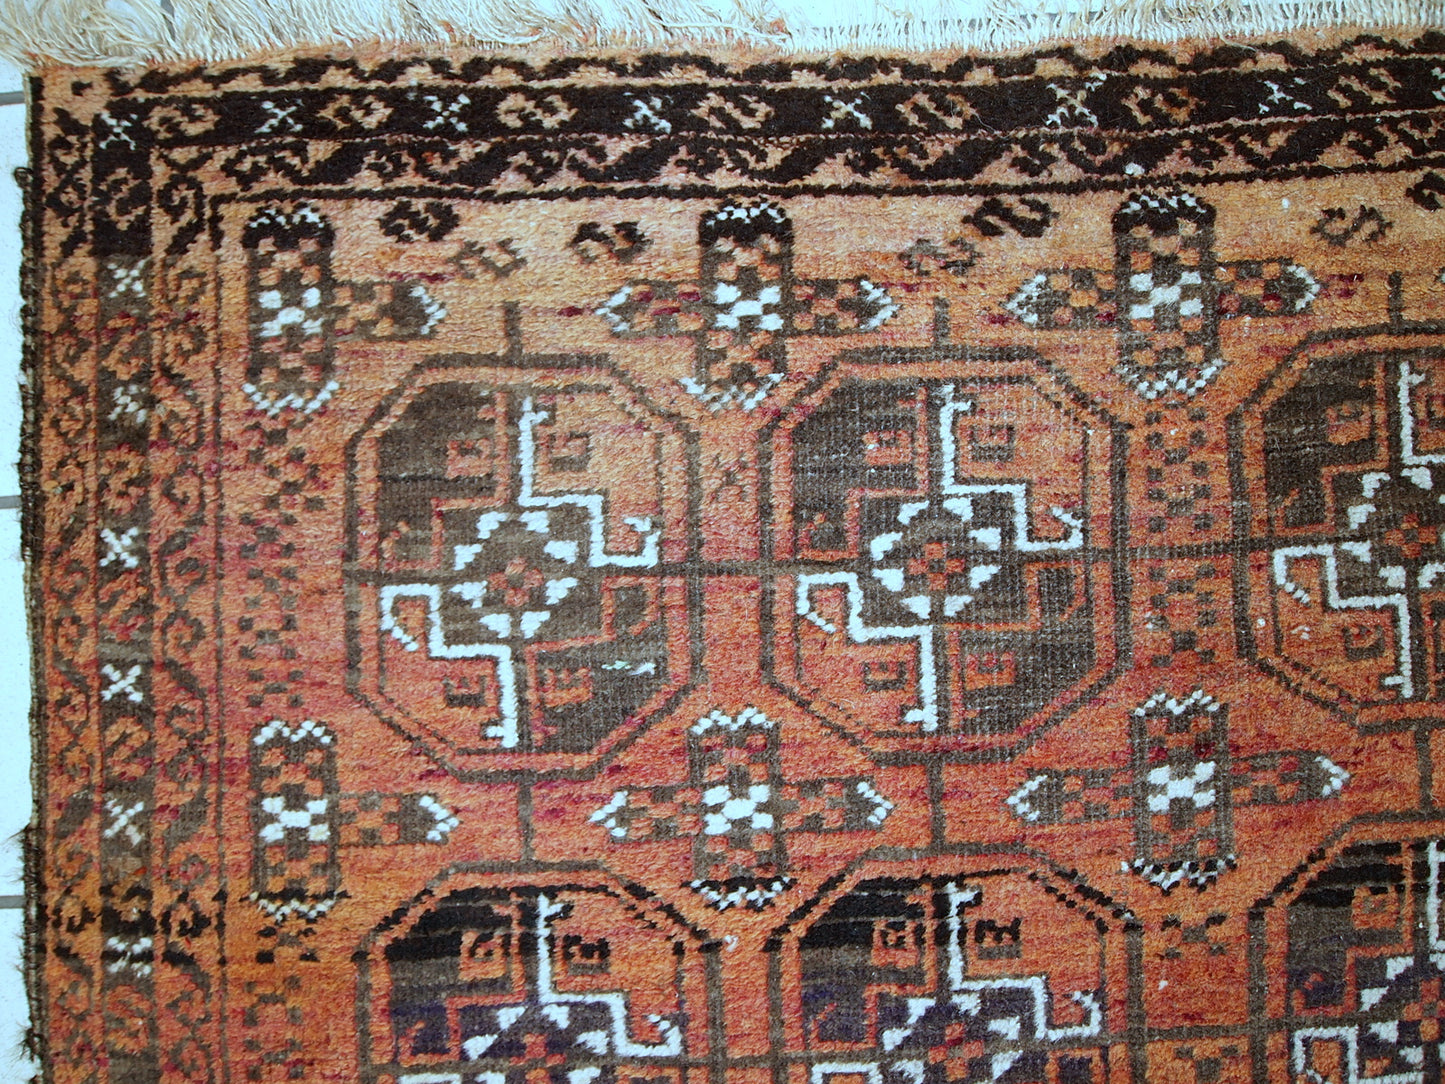 Antique hand made Afghan Baluch rug in original good condition. This rug is in brick red shade with repeating design.